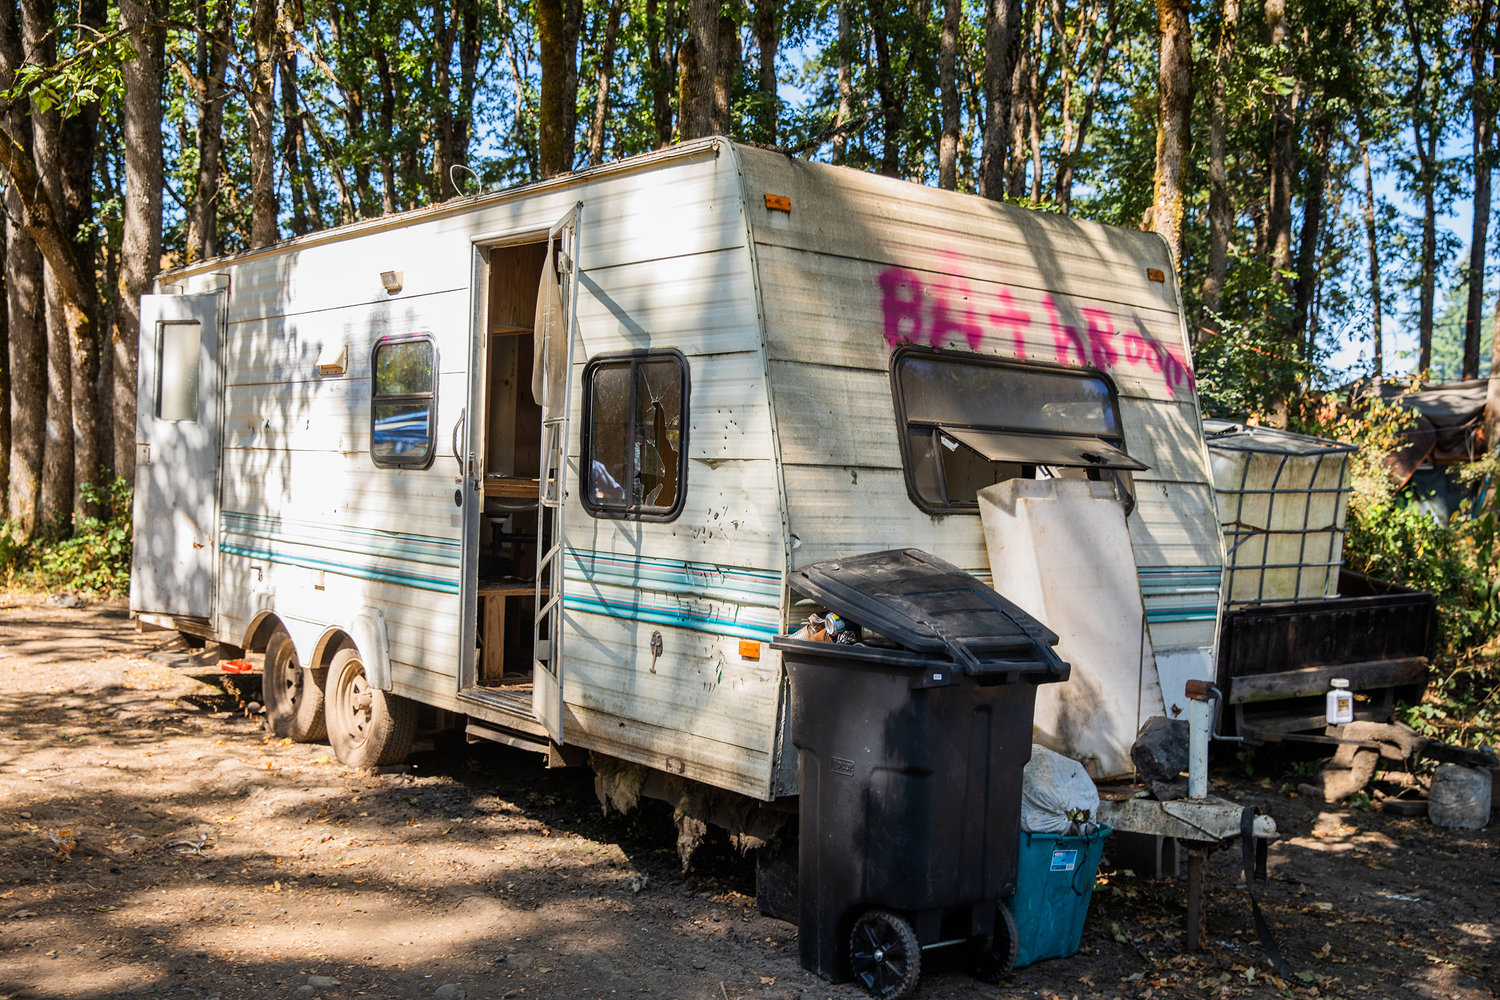 A dilapidated trailer reads “Bathroom” in spray paint at a homeless encampment at the end of Eckerson Road in Centralia earlier this year.